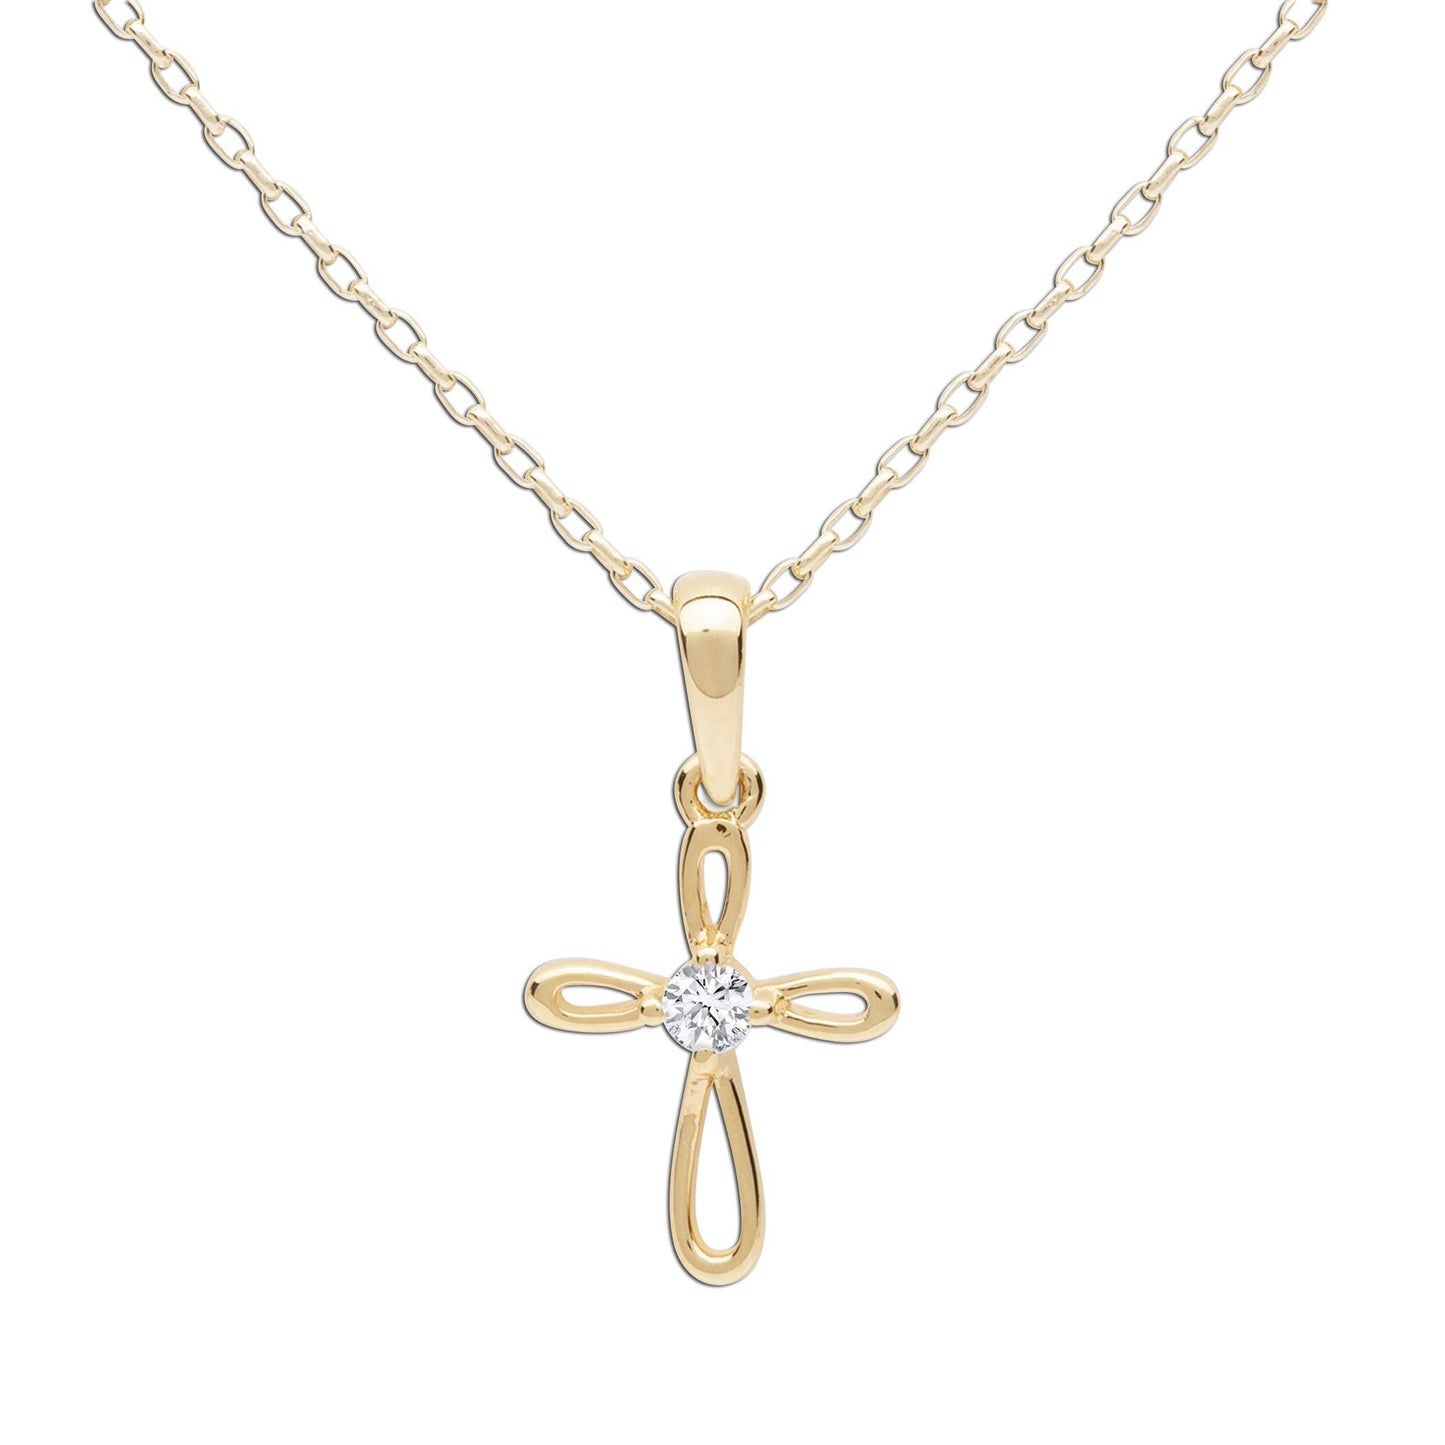 Cherished Moments - 14K Gold-Plated Kids Cross Open Infinity Children's Necklace